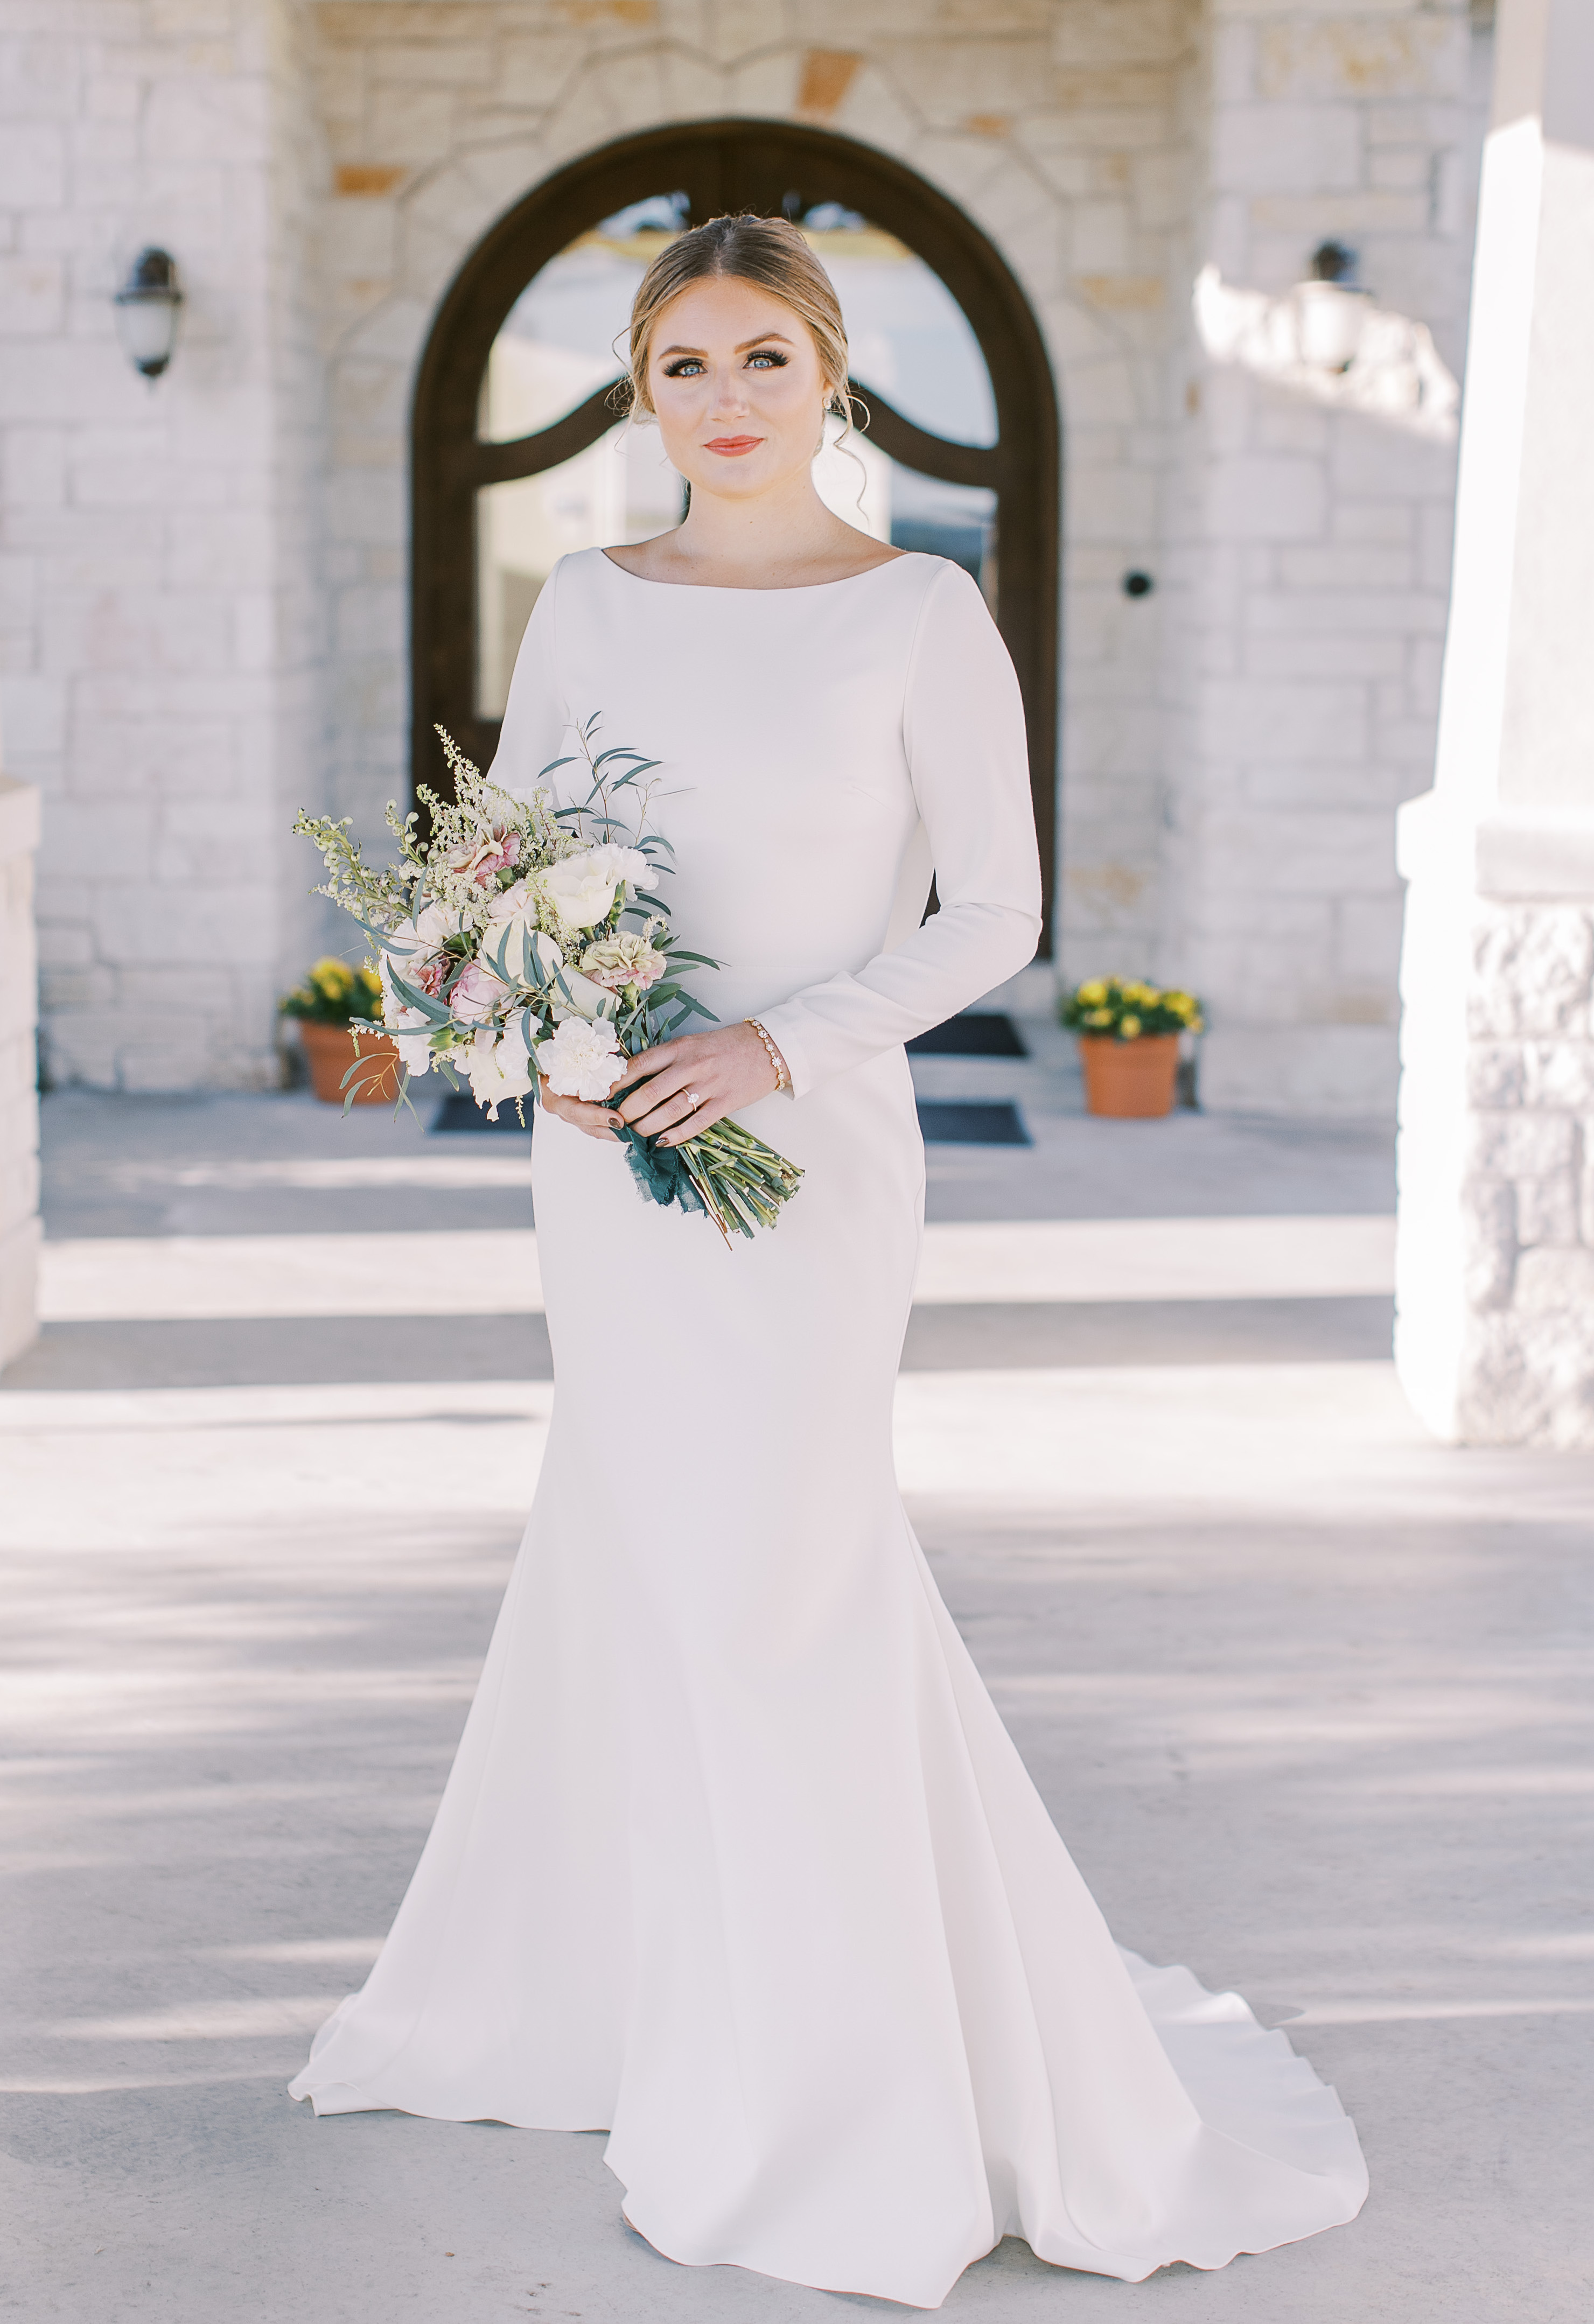 A bride wears a white long sleeve wedding dress and holds a bridal bouquet during a sunlit hill country editorial in Dripping Springs, TX.